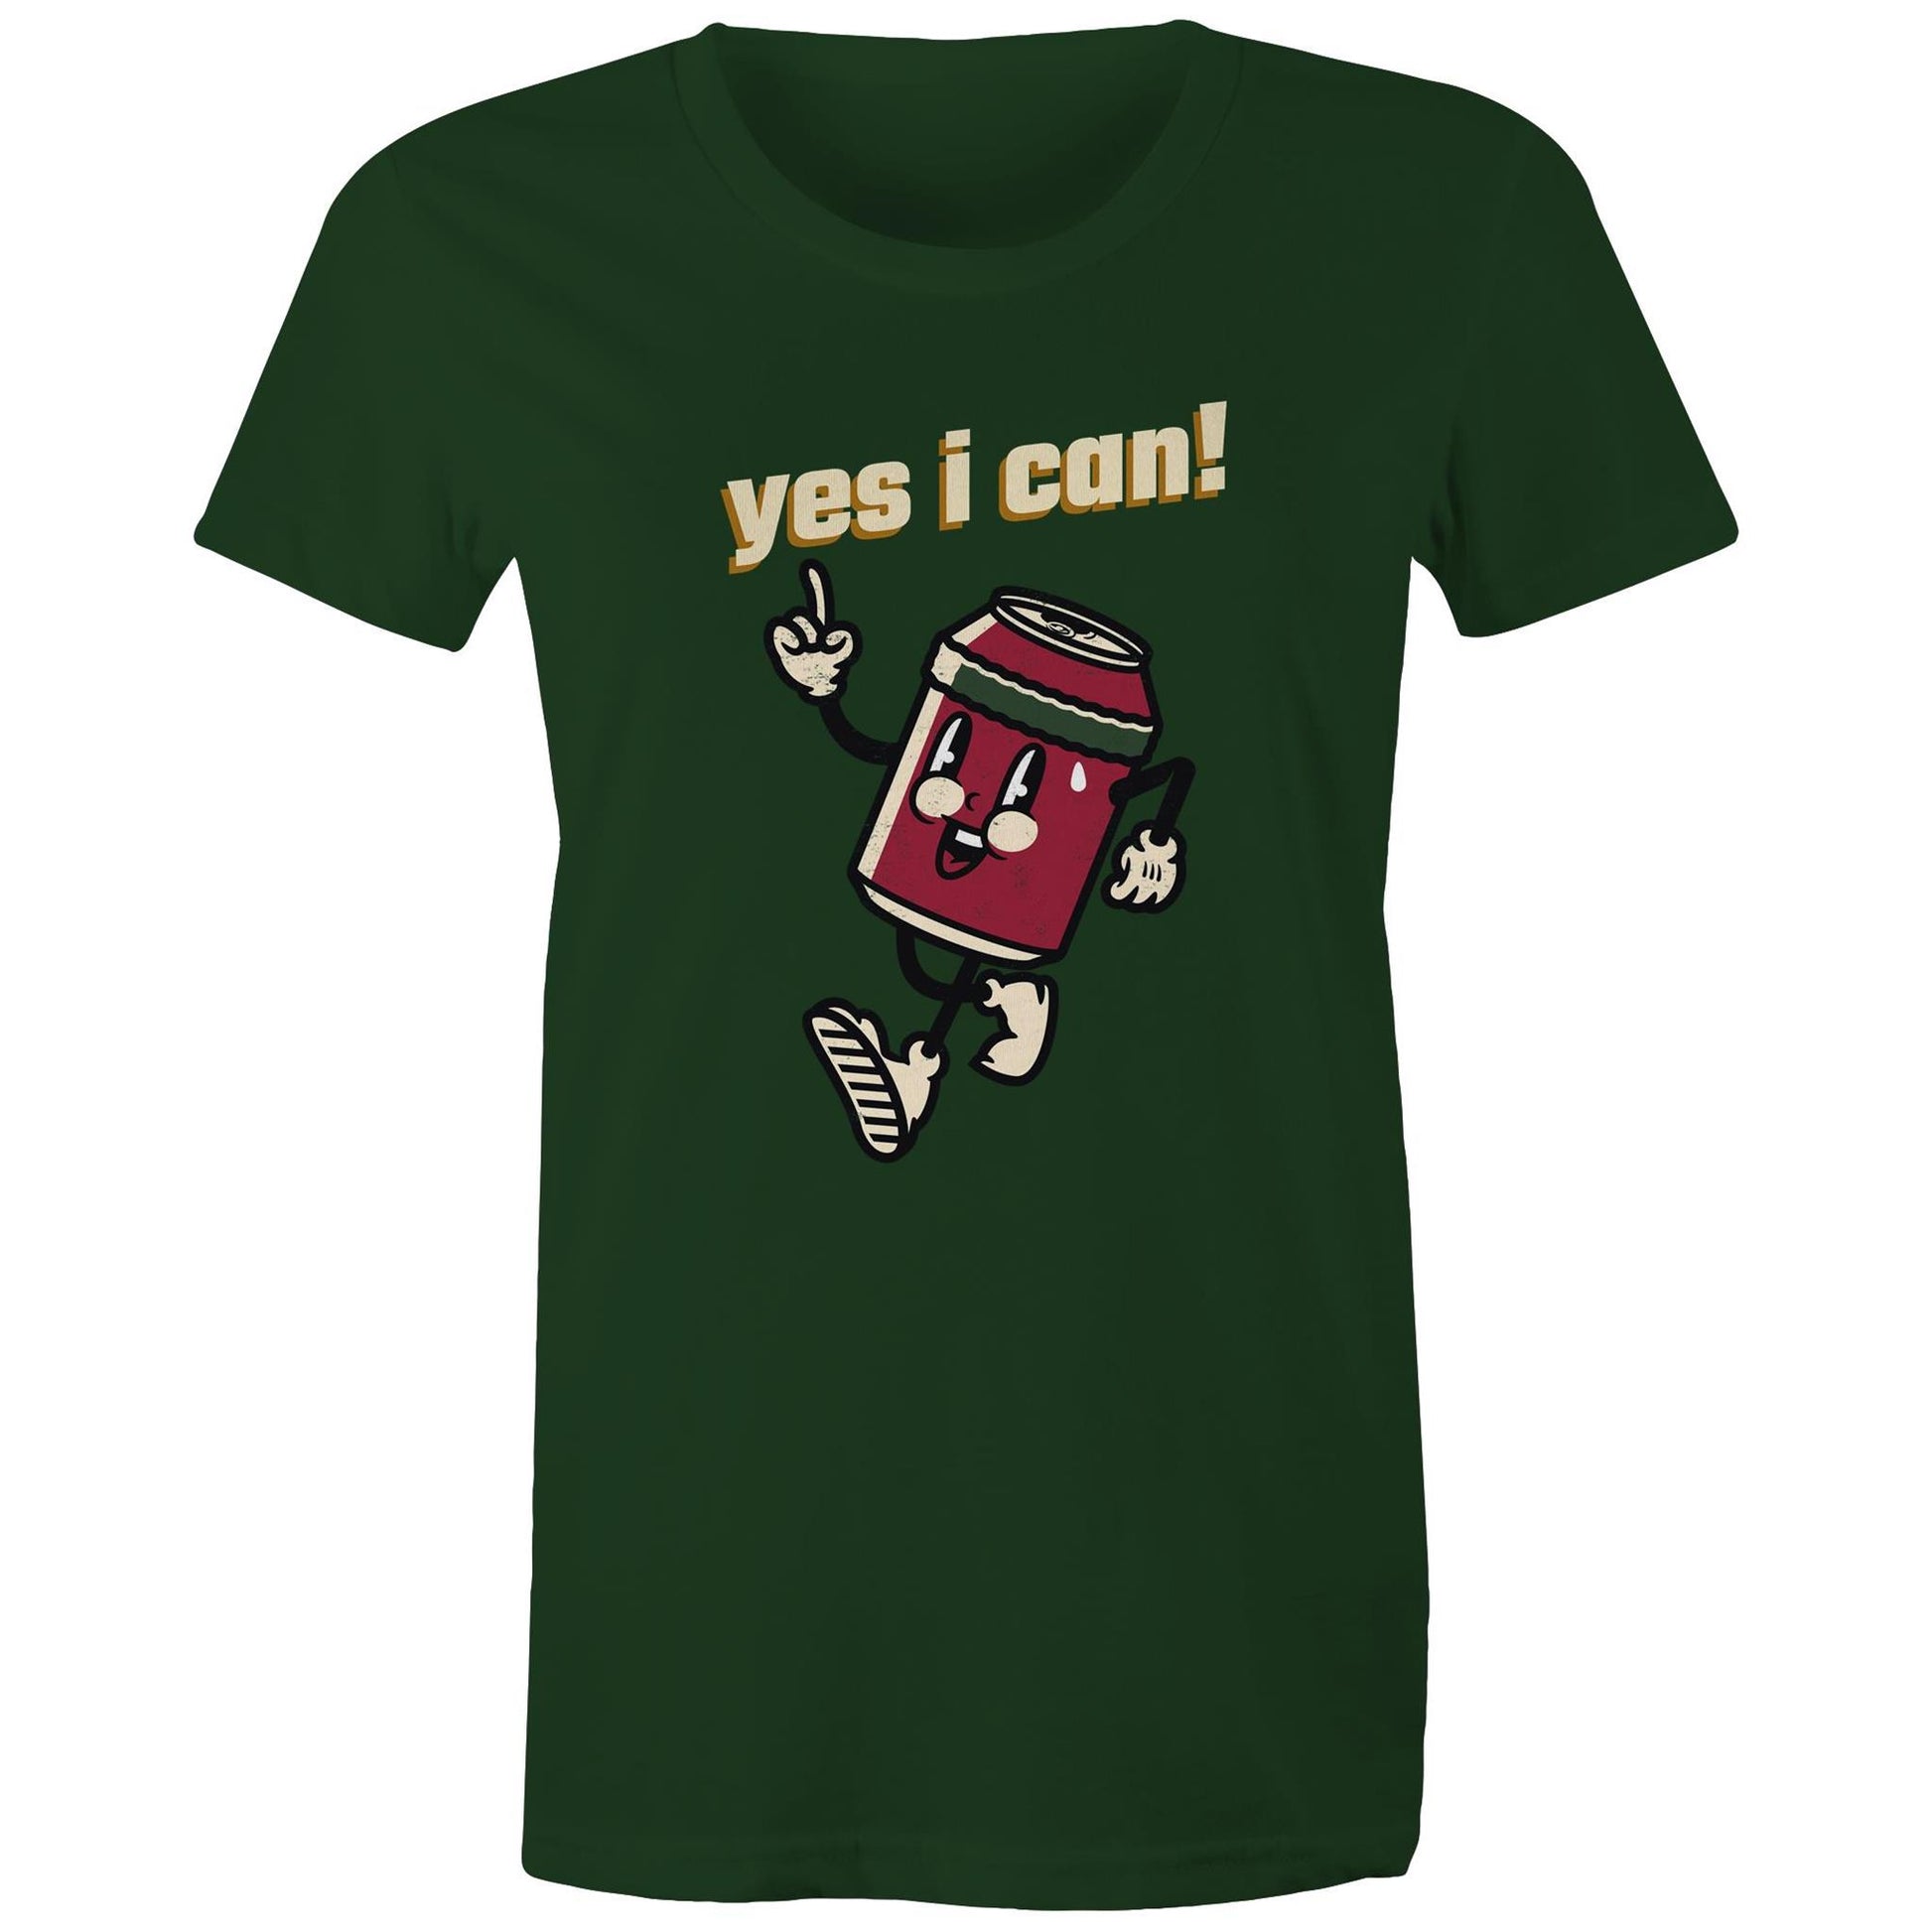 Yes I Can! - Womens T-shirt Forest Green Womens T-shirt Motivation Retro